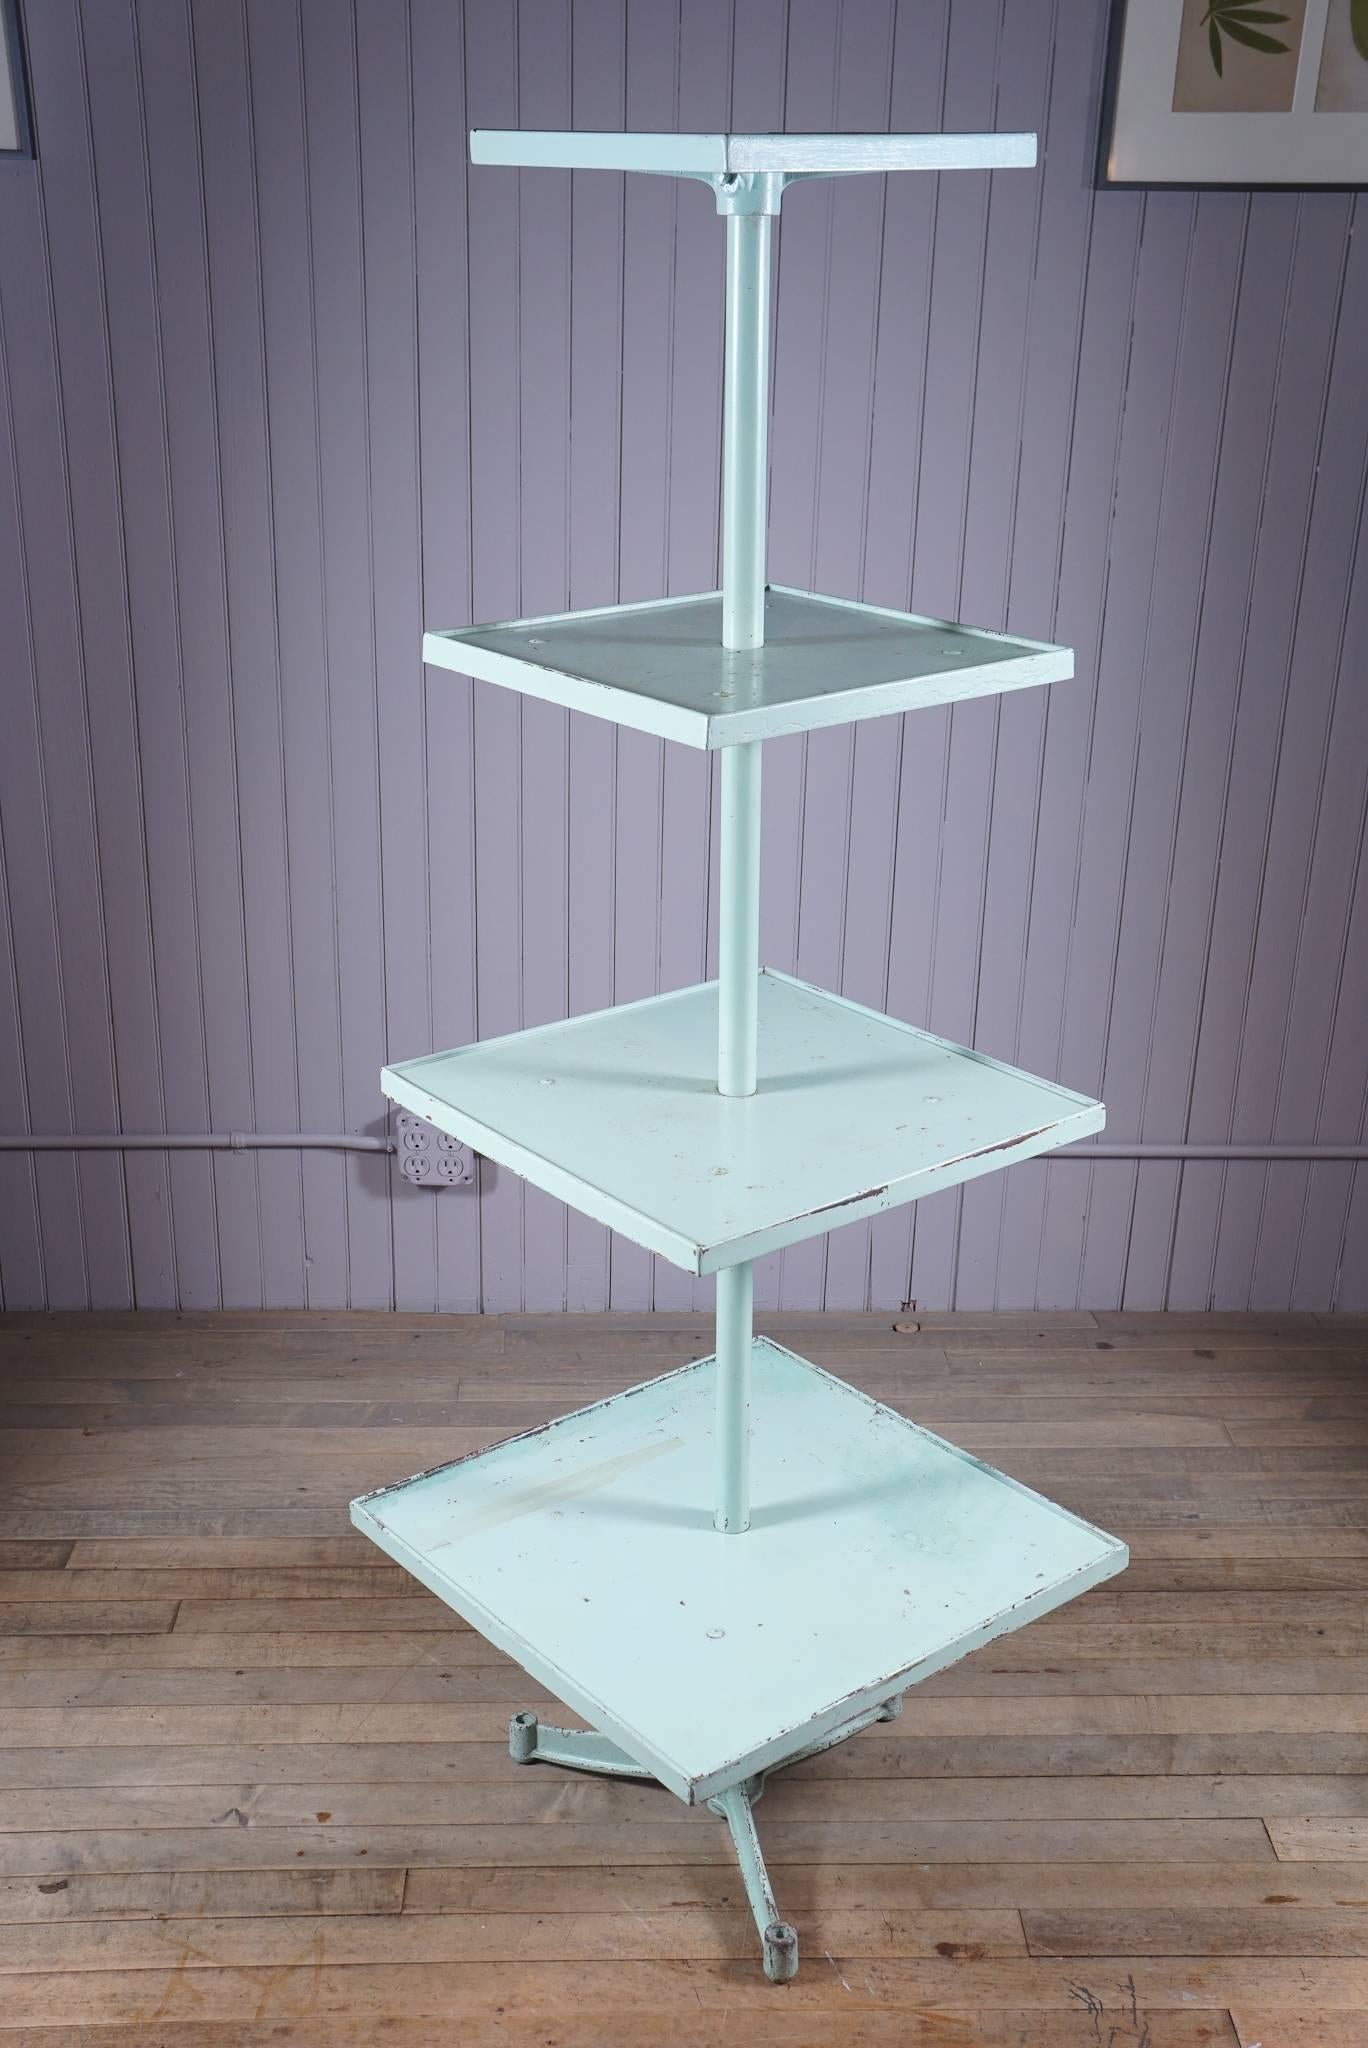 four square shelves with molded edging - graduated sizes - possibly adjustable - on pole with cast iron base